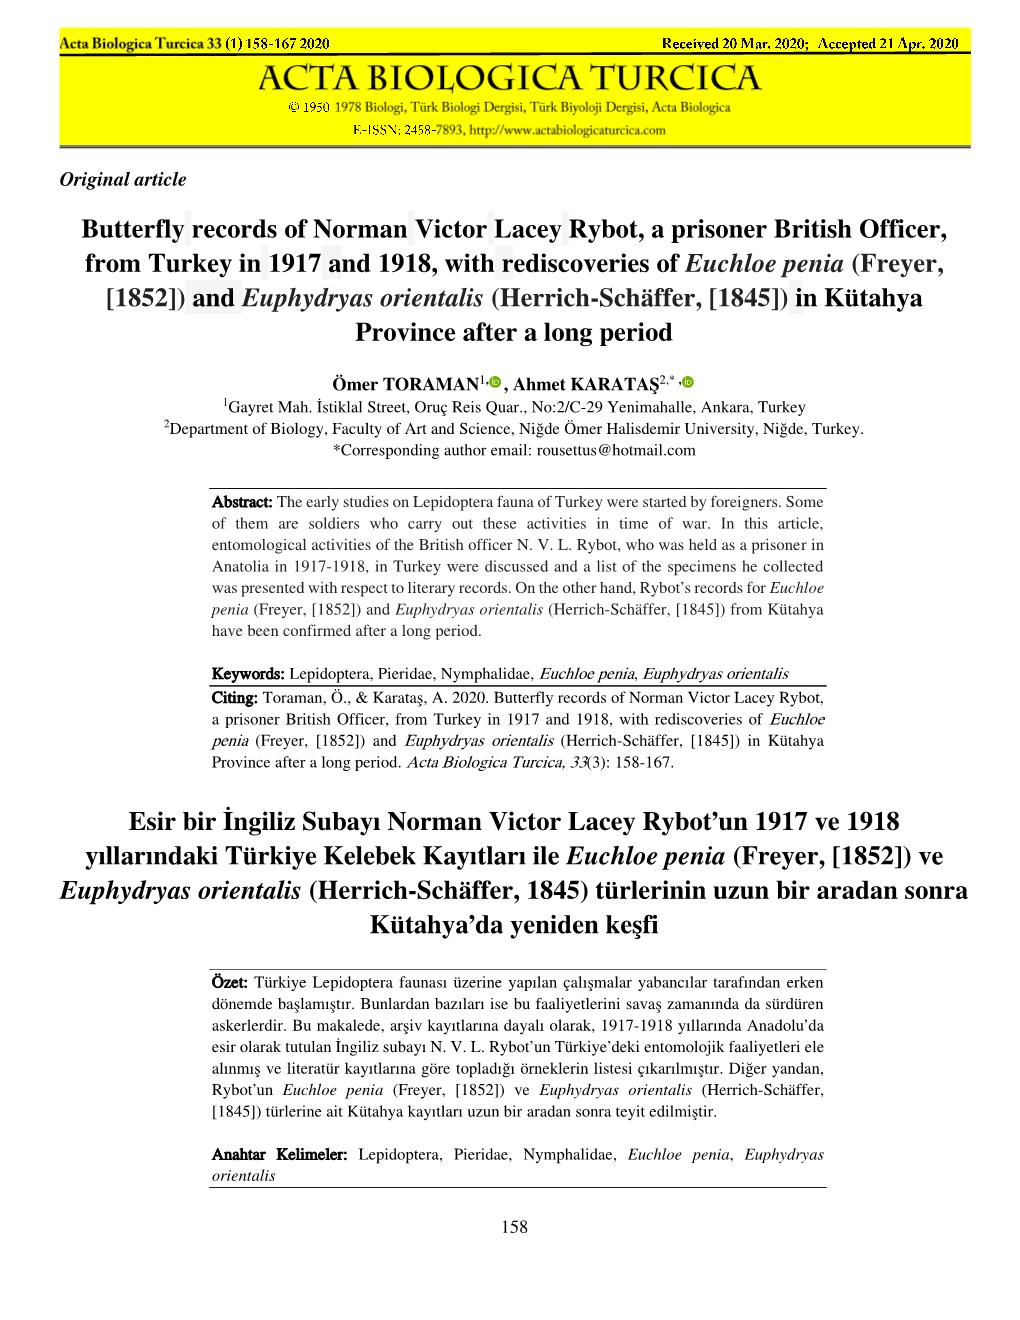 Butterfly Records of Norman Victor Lacey Rybot, a Prisoner British